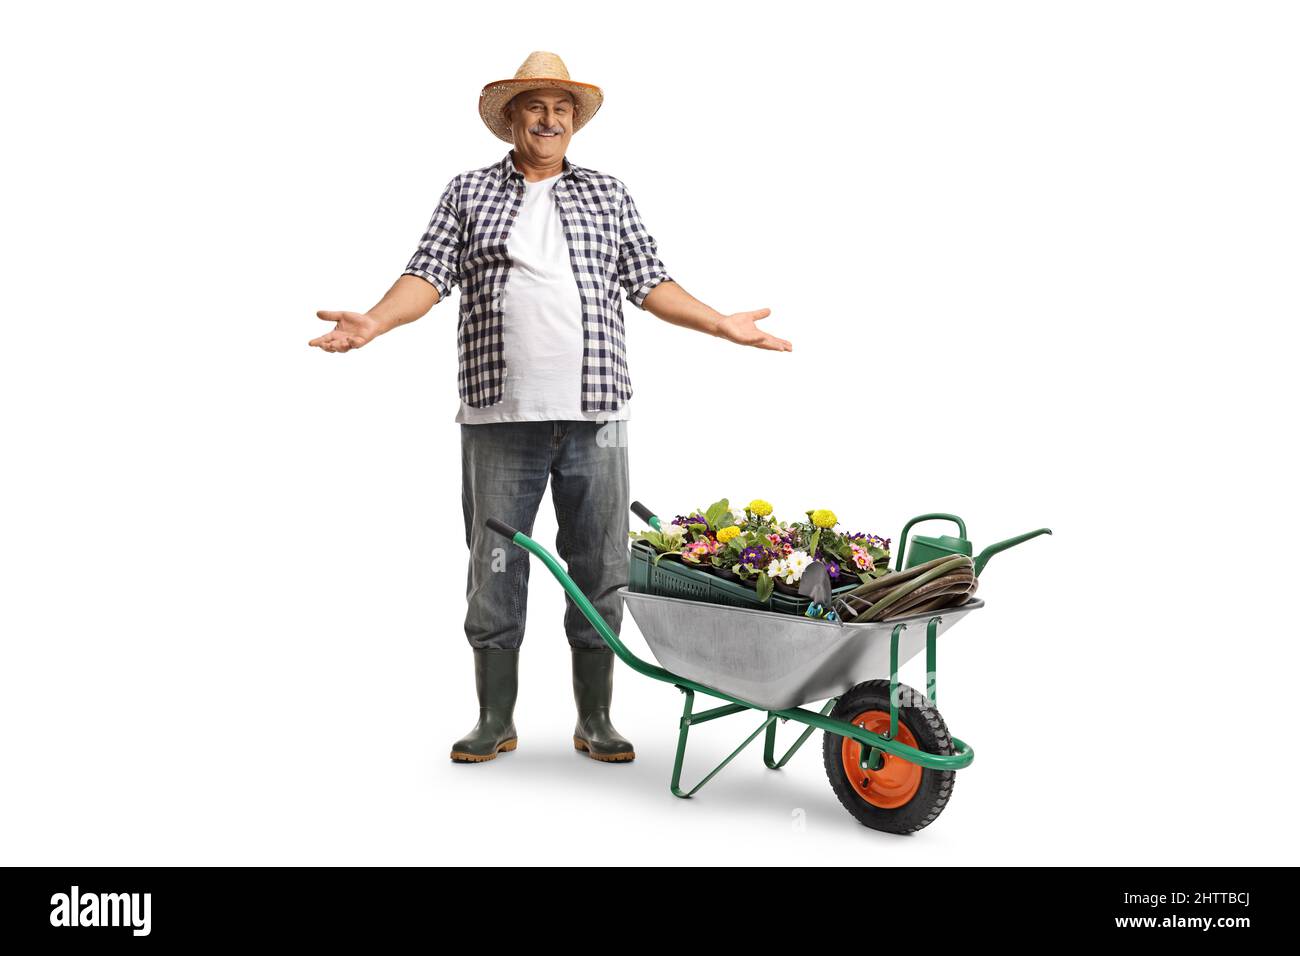 Full length portrait of a smiling mature farmer with a straw hat with a hand cart full of plants isolated on white background Stock Photo